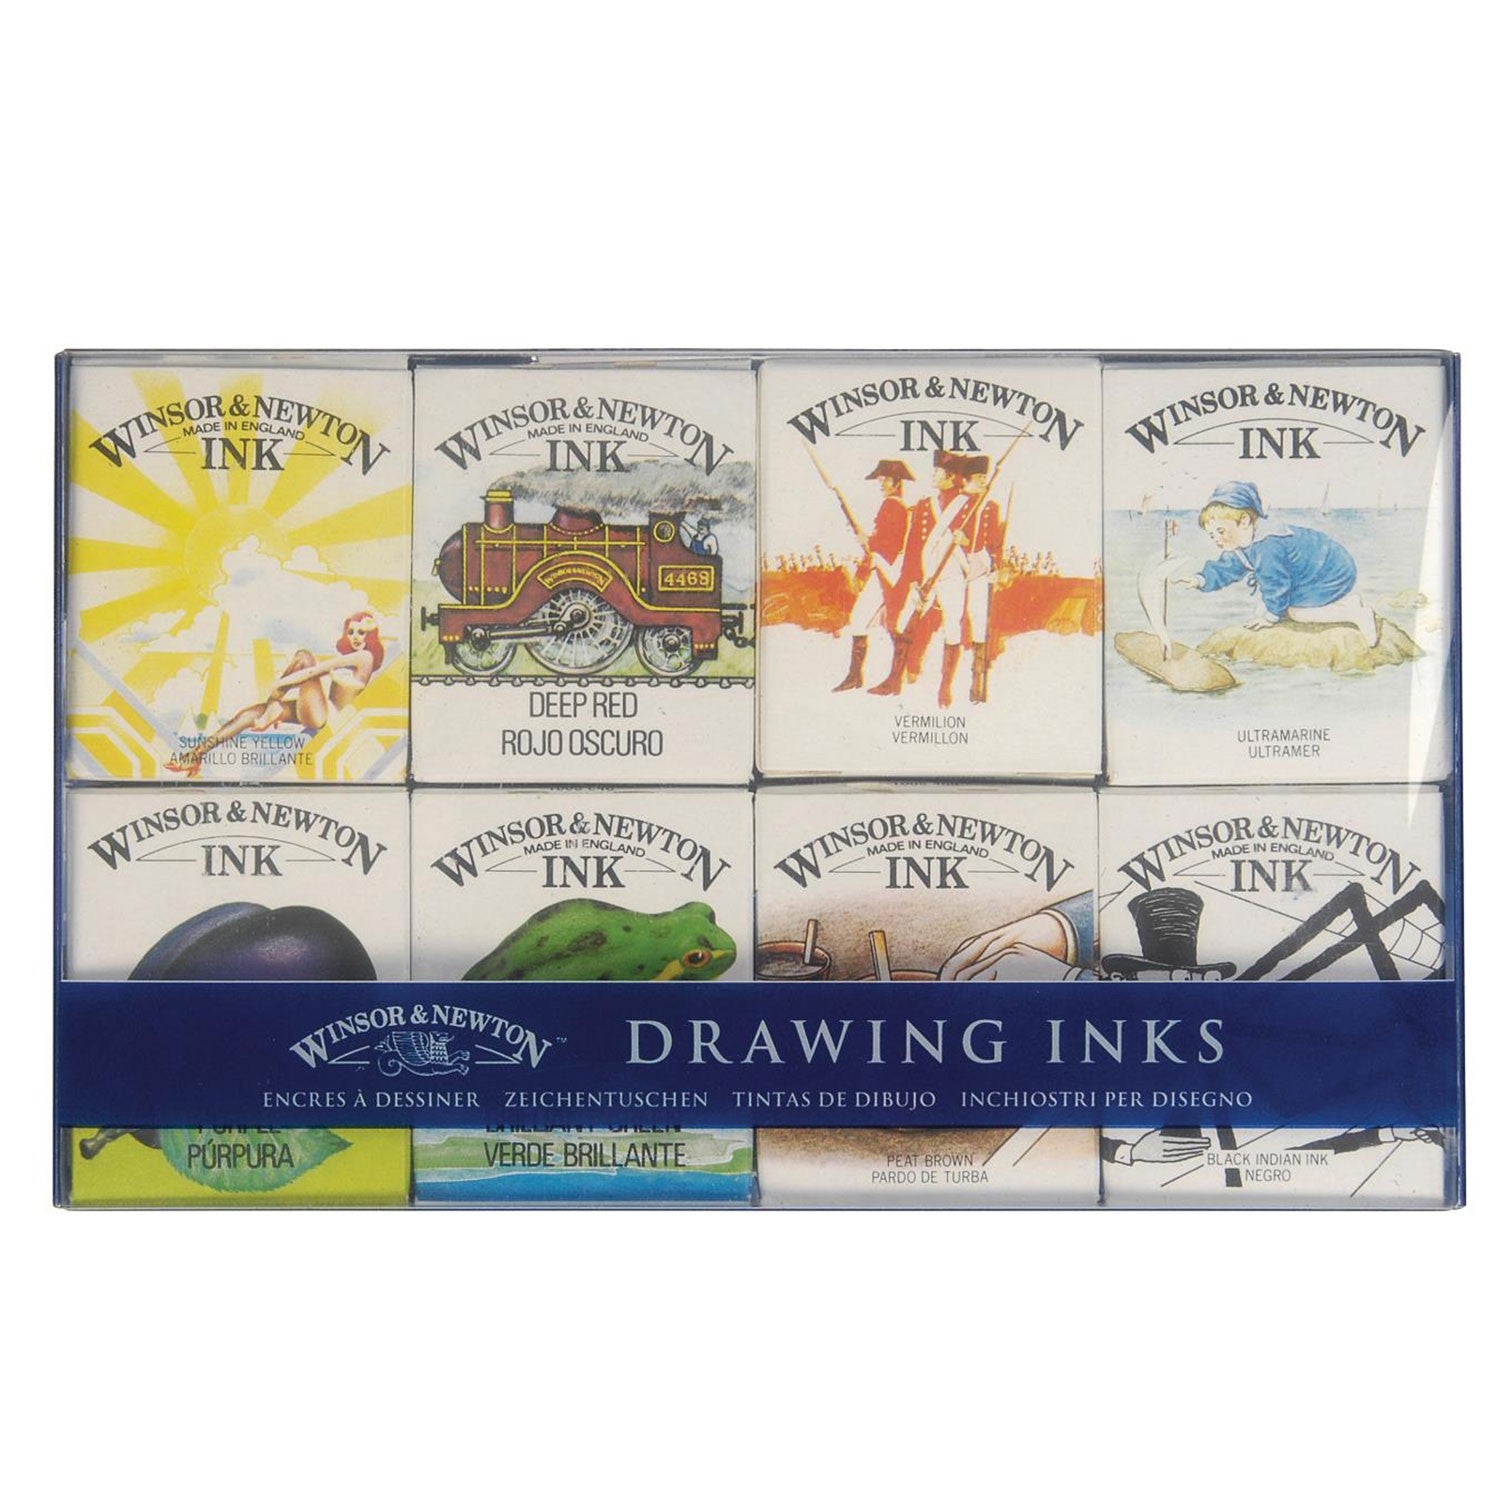 Winsor & Newton Drawing Inks - The William Set